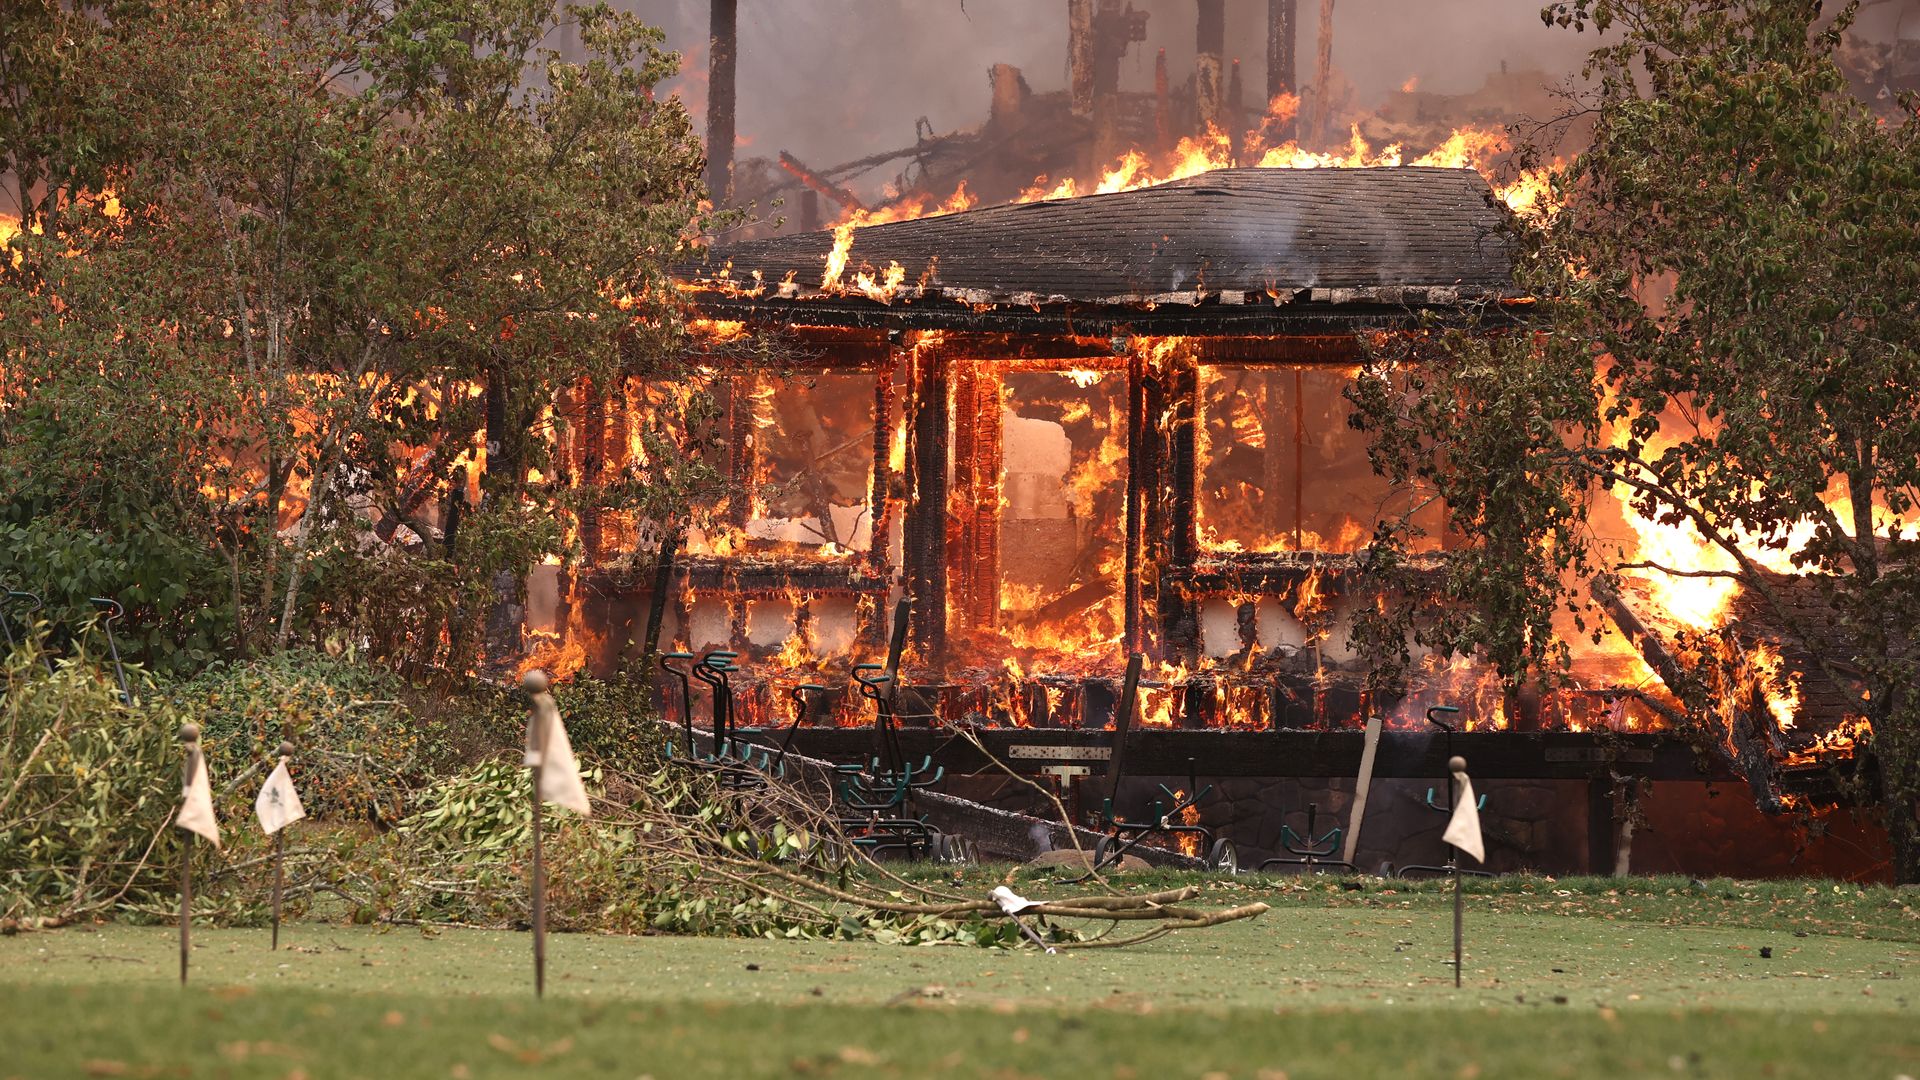 The main building and restaurant at Meadowood Napa Valley luxury resort burns